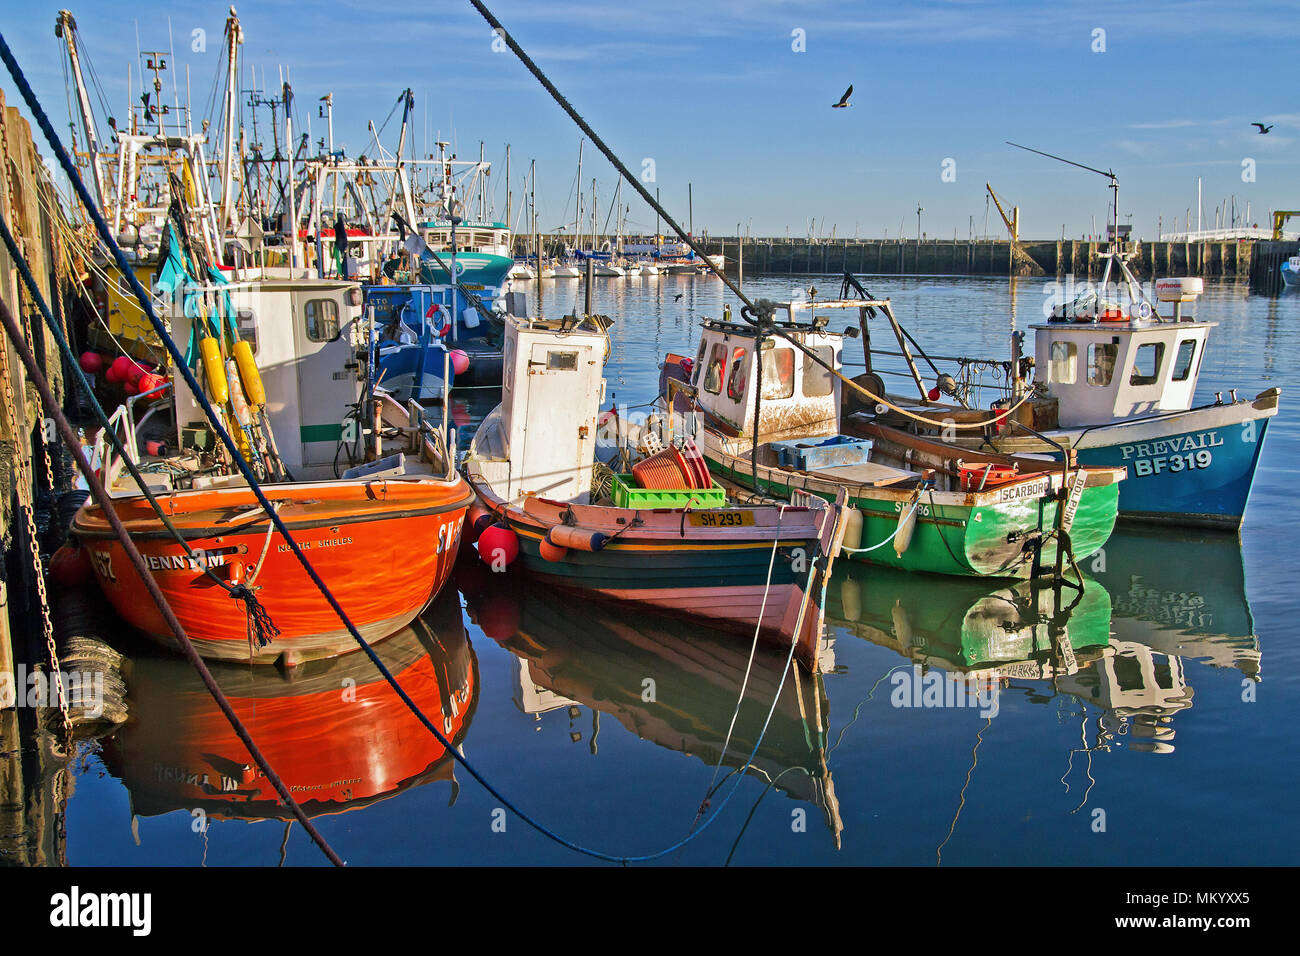 A group of small fishing vessels lit by the evening sun at moorings in Scarborough harbour. Stock Photo